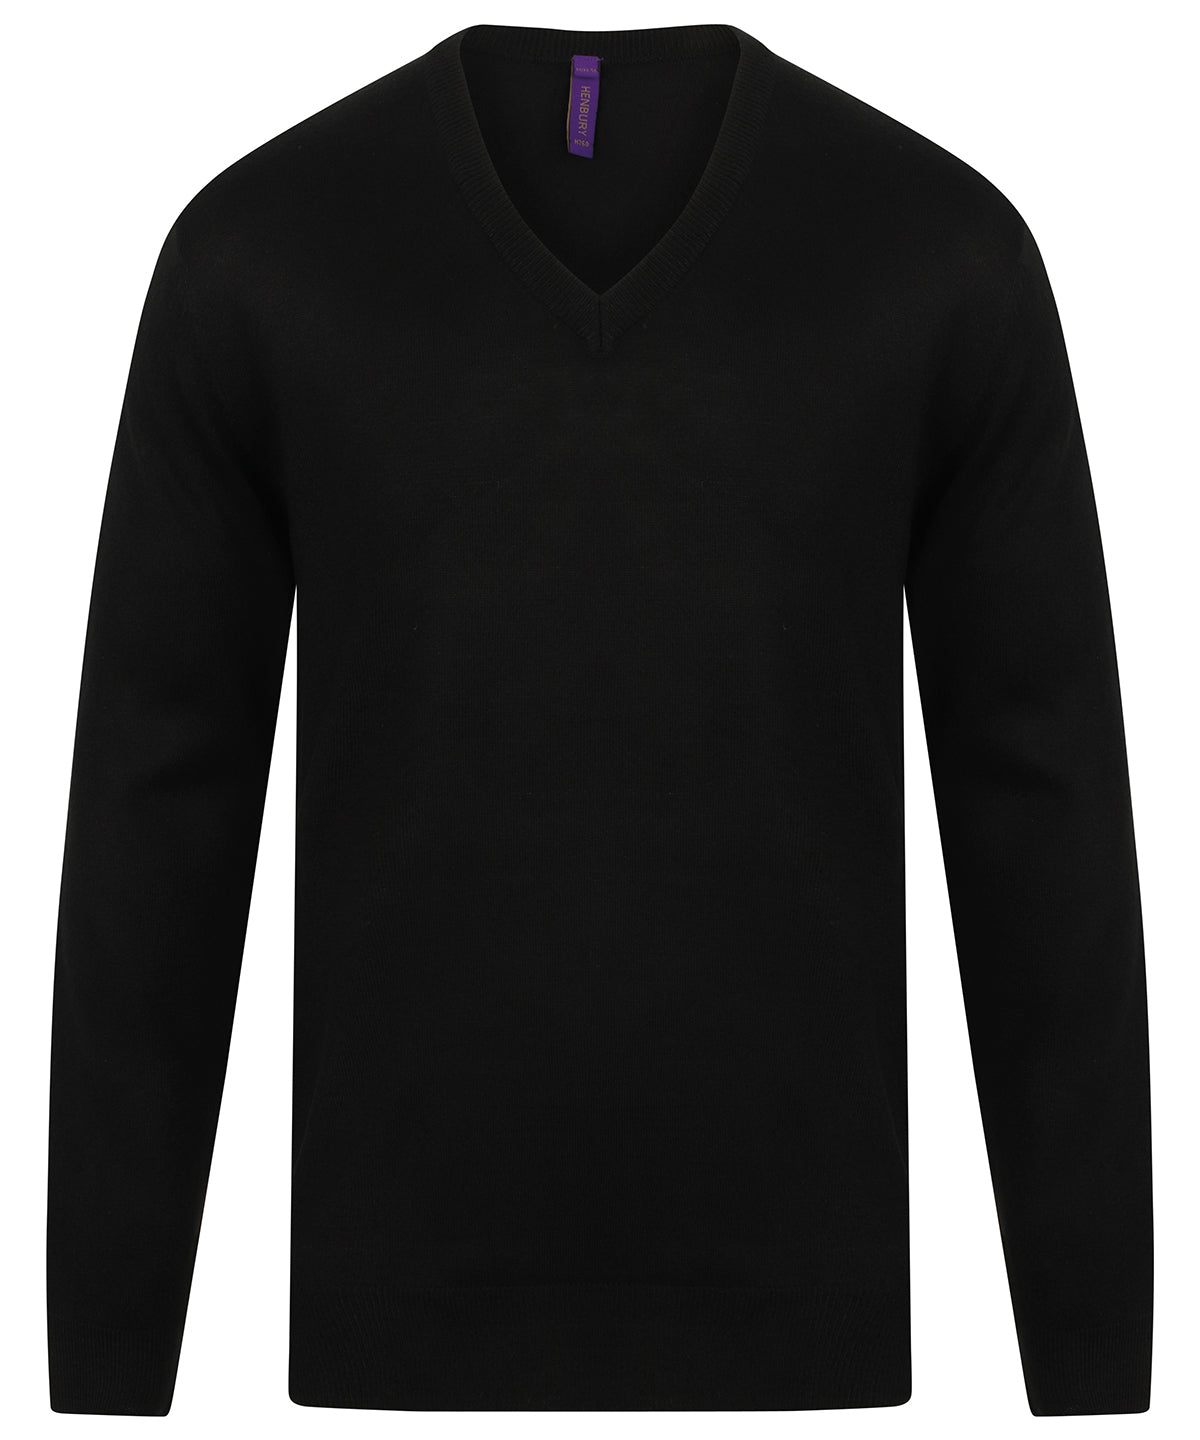 Personalised Knitted Jumpers - Black Henbury Cashmere touch acrylic v-neck jumper